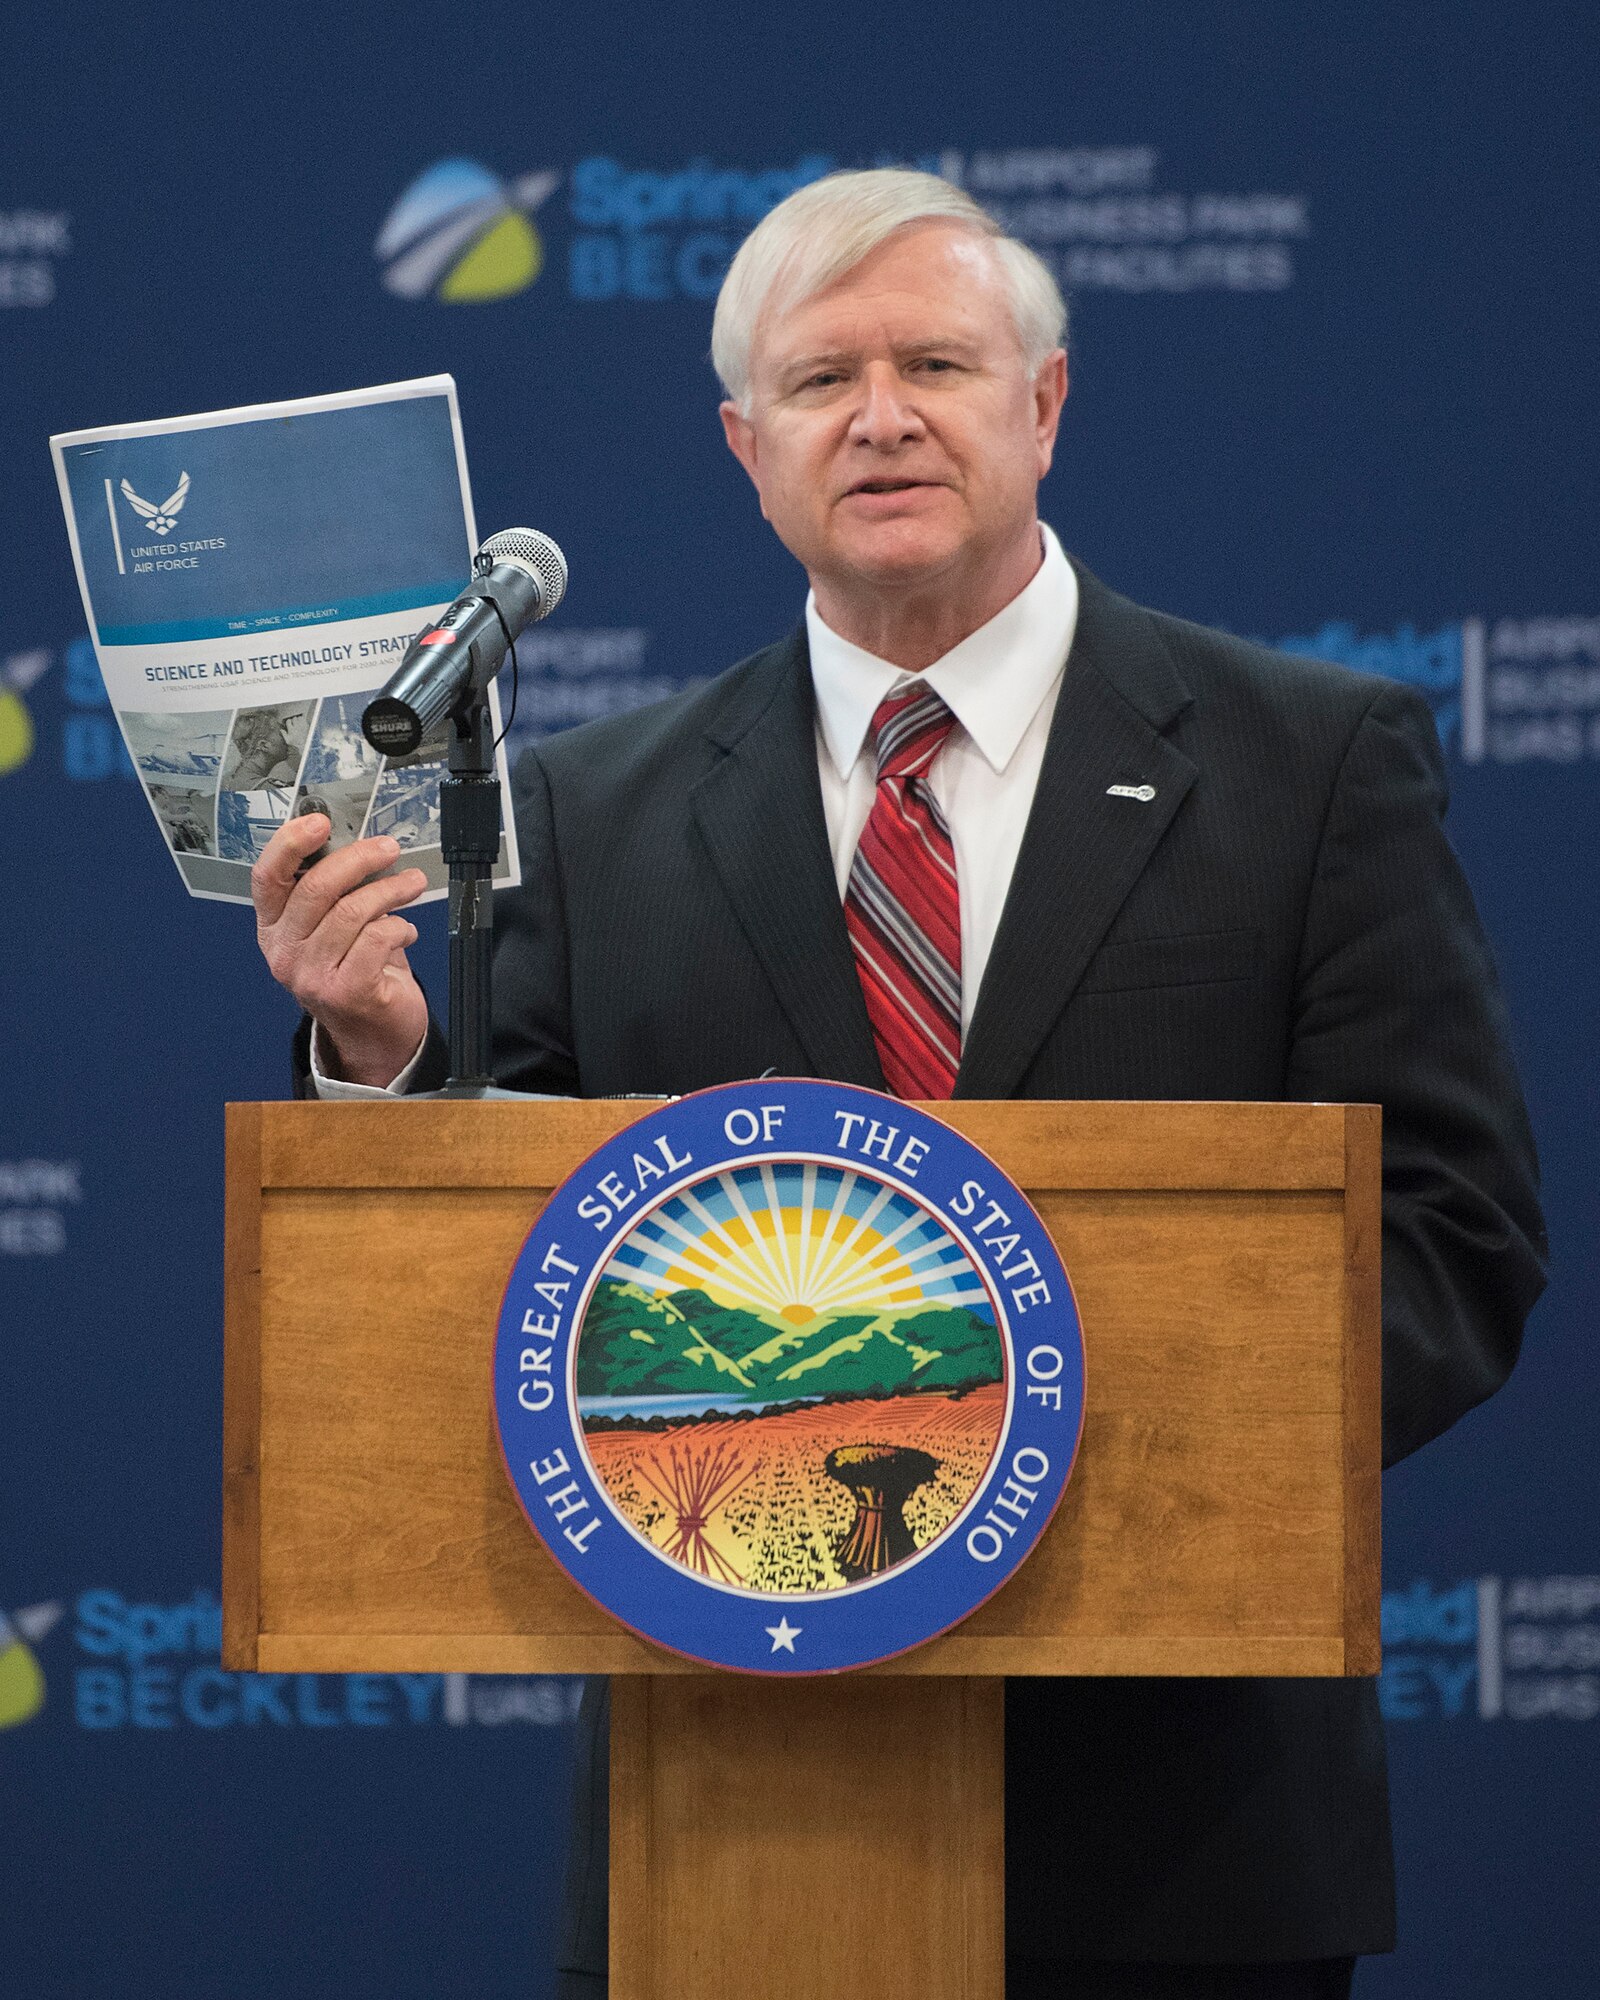 Jack Blackhurst, Air Force Research Laboratory executive director, holds up a copy of the U.S. Air Force Science and Technology Strategy, released by Secretary of the Air Force Heather Wilson, as he addresses the audience April 26, 2019, at the Springfield-Beckley Municipal Airport in Springfield, Ohio. The event was to announce the Federal Aviation Administration granting a Certificate of Waiver or Authorization to AFRL for beyond visual line of sight flights of unmanned aerial systems. (U.S. Air Force photo by R.J. Oriez)